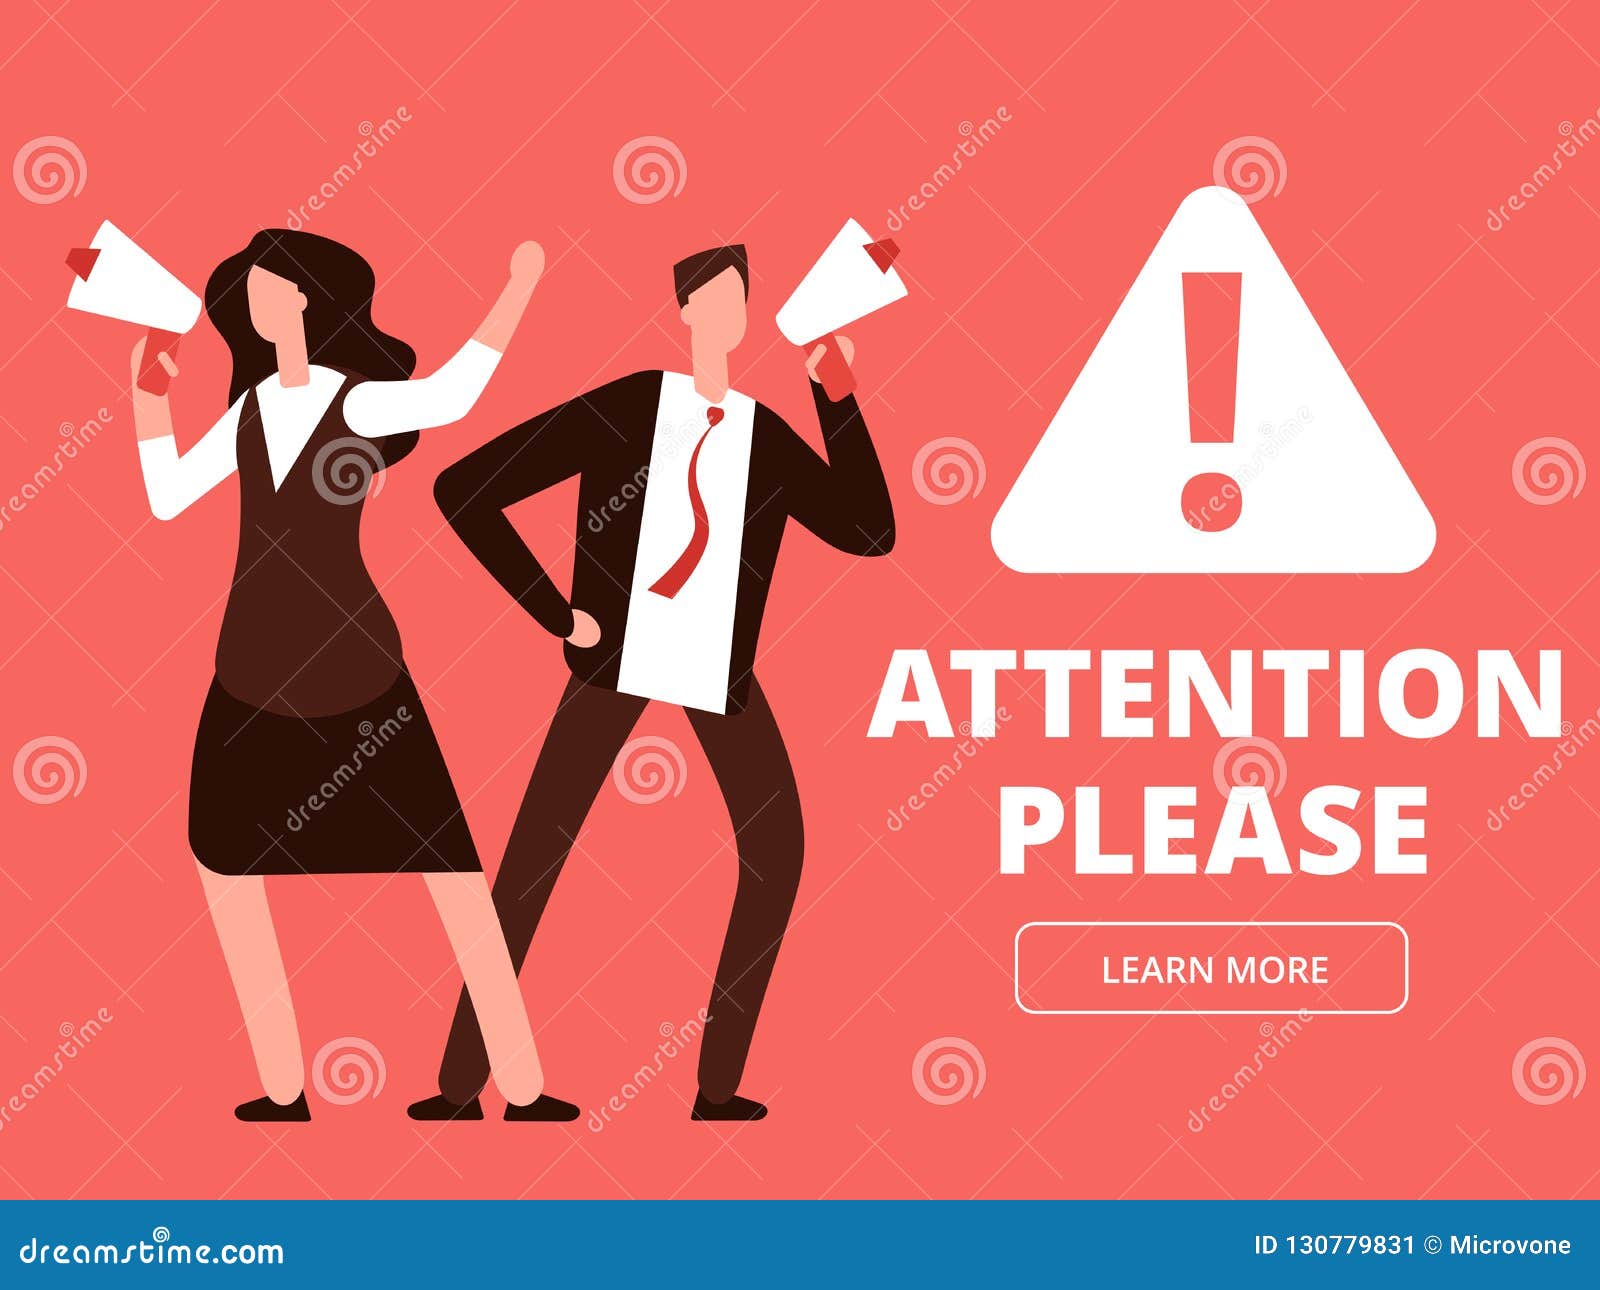 attention  banner or web page template with cartoon man and woman with megaphones